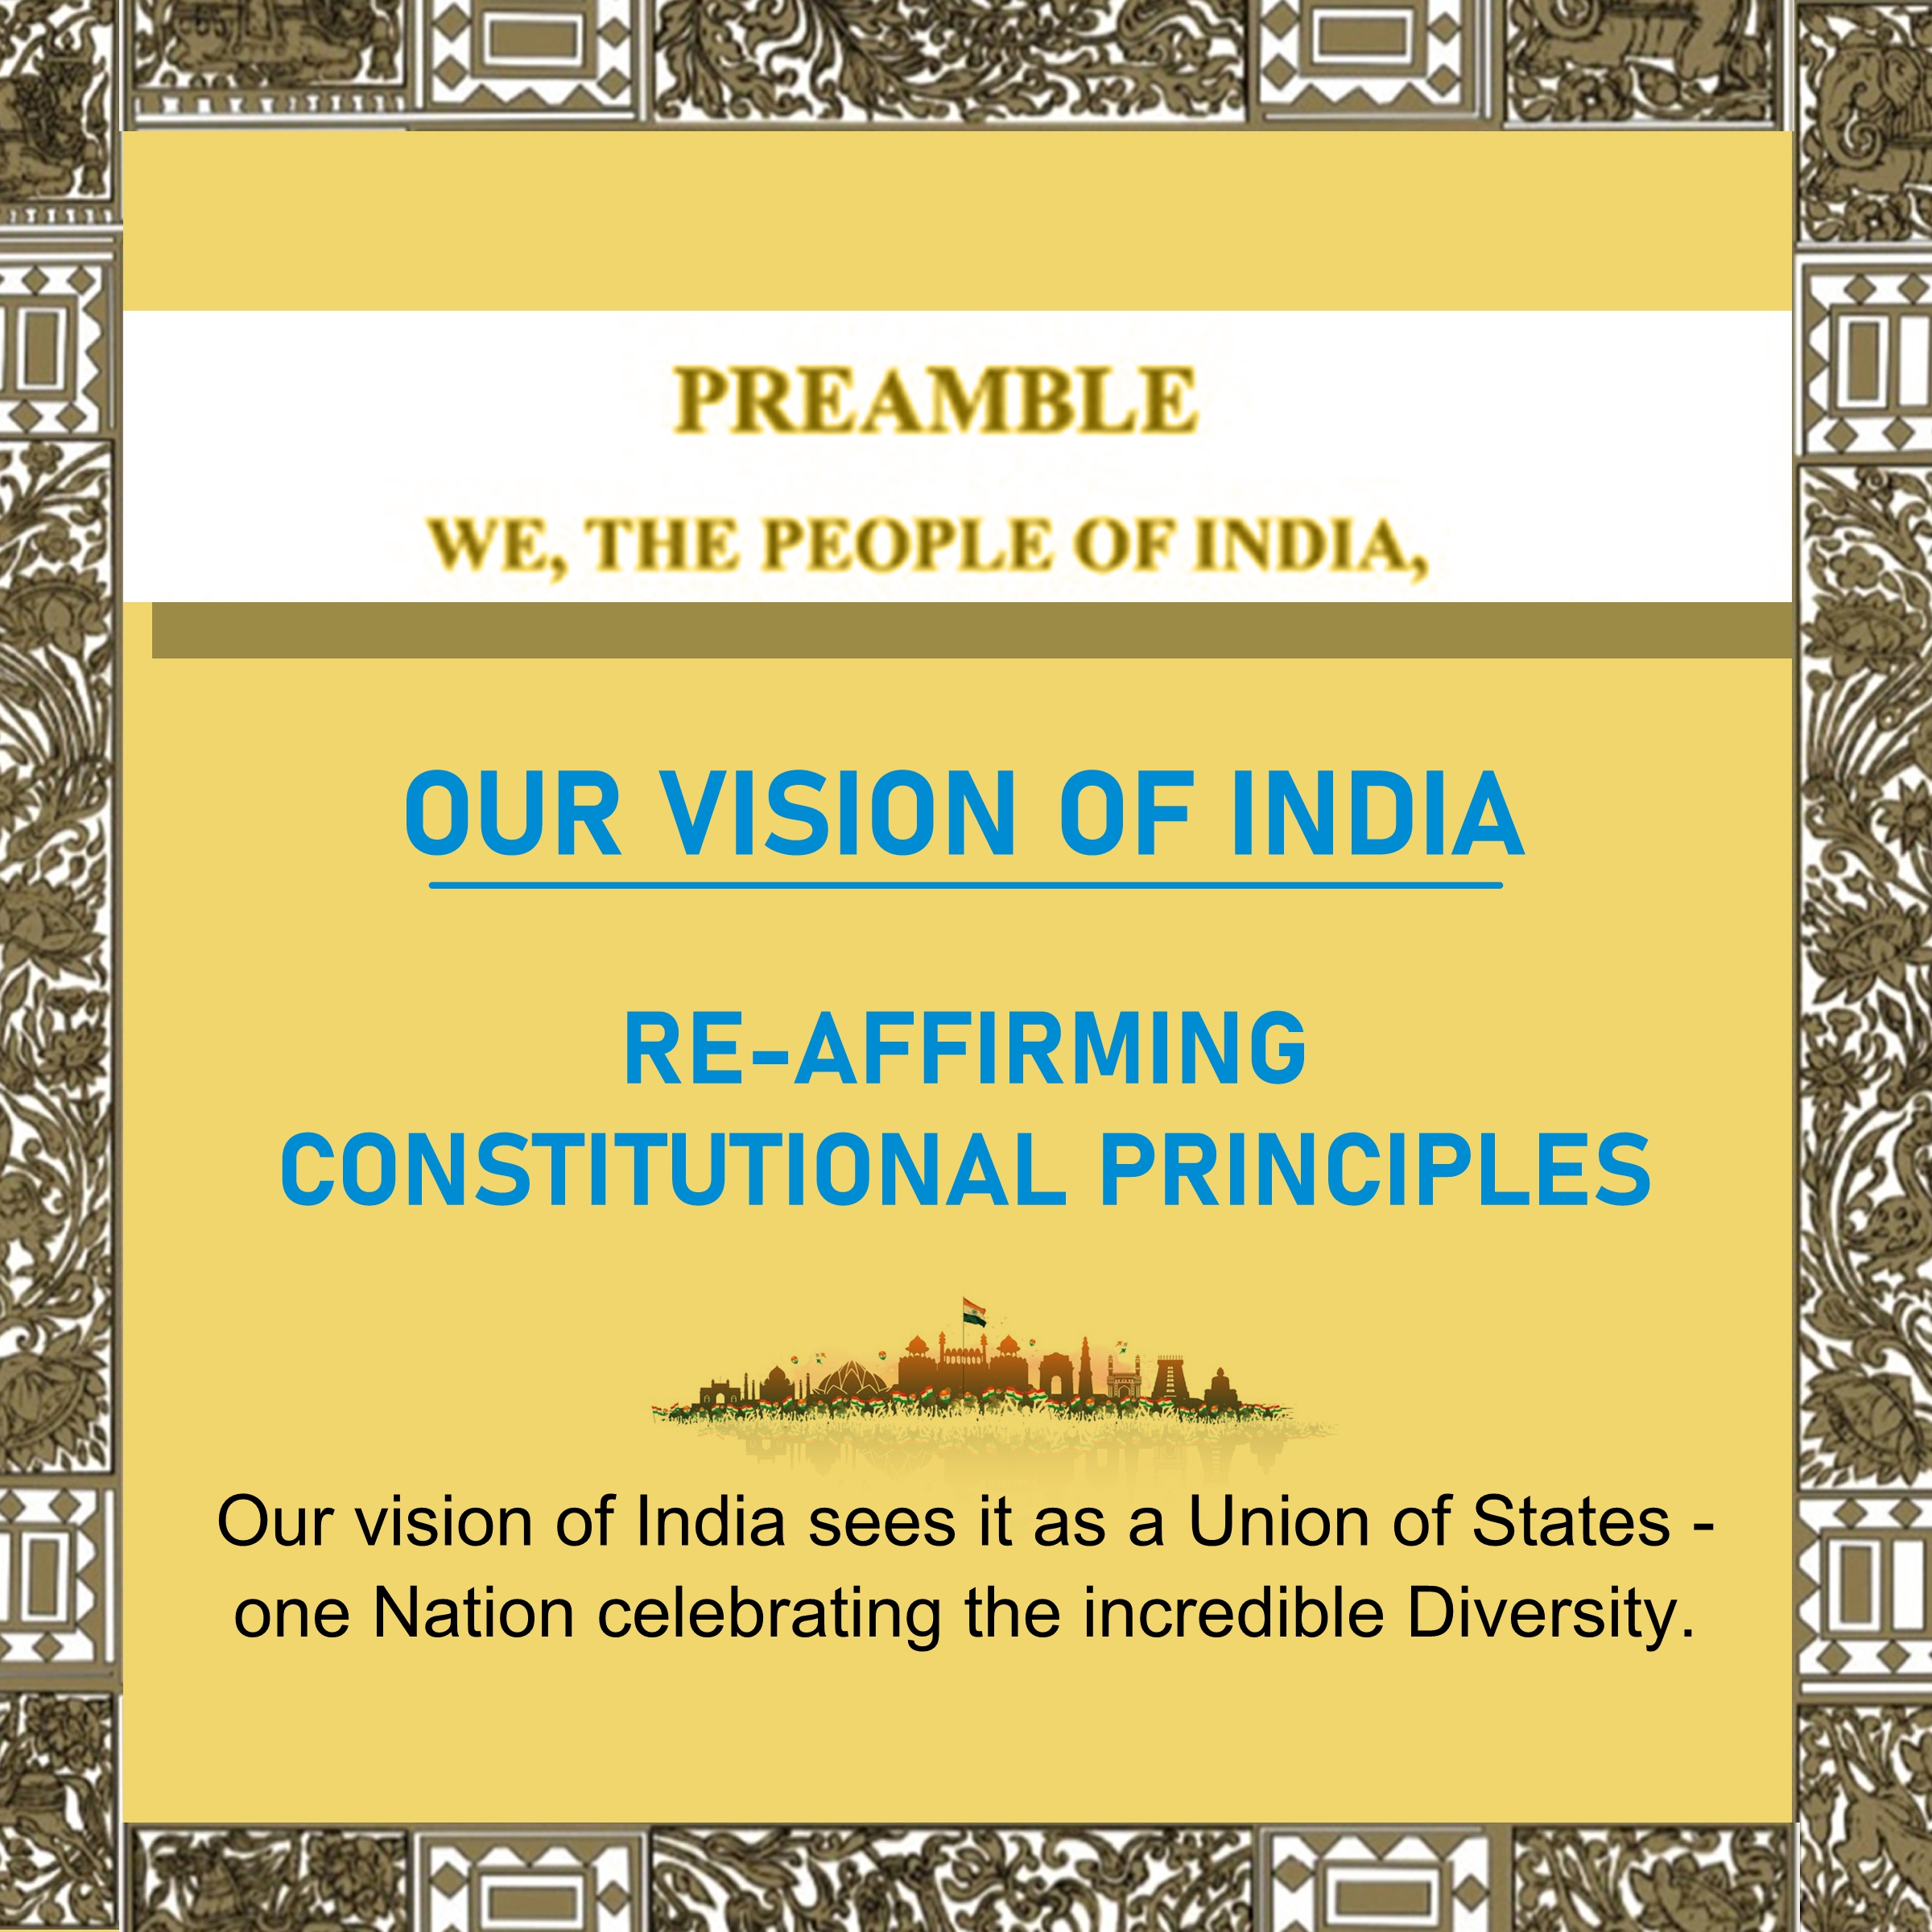 preamble of india - Vision of india